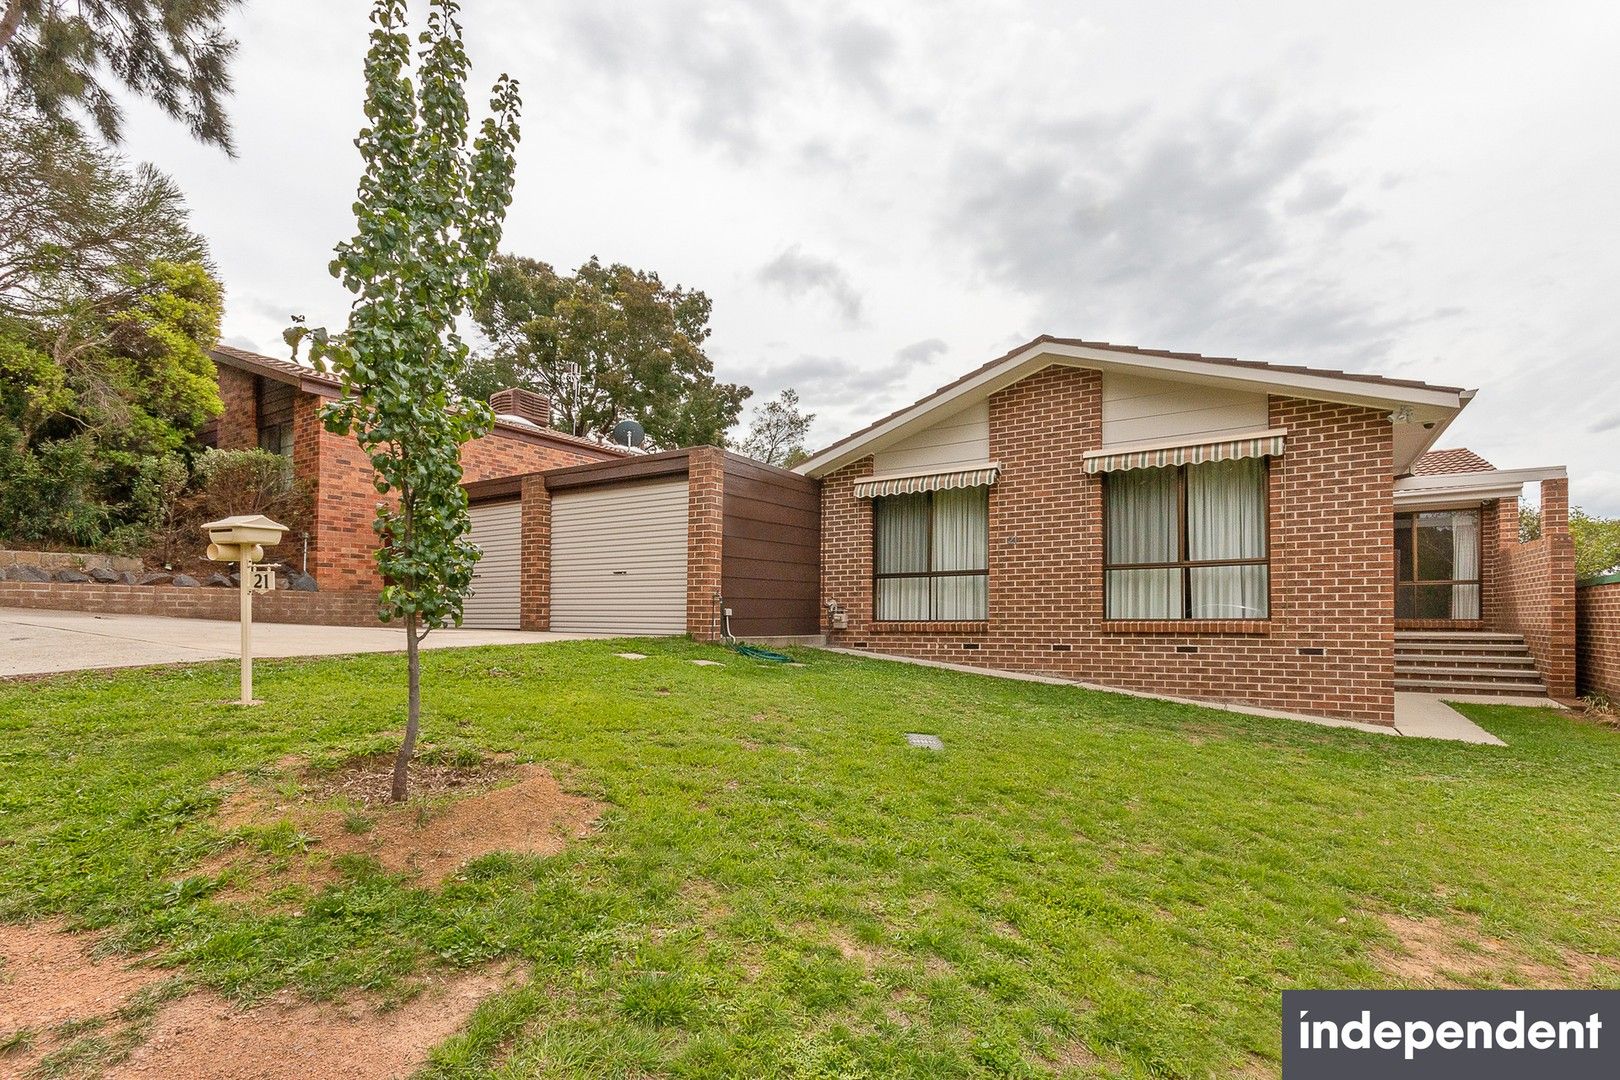 3 bedrooms House in 21 Frater Crescent LYNEHAM ACT, 2602